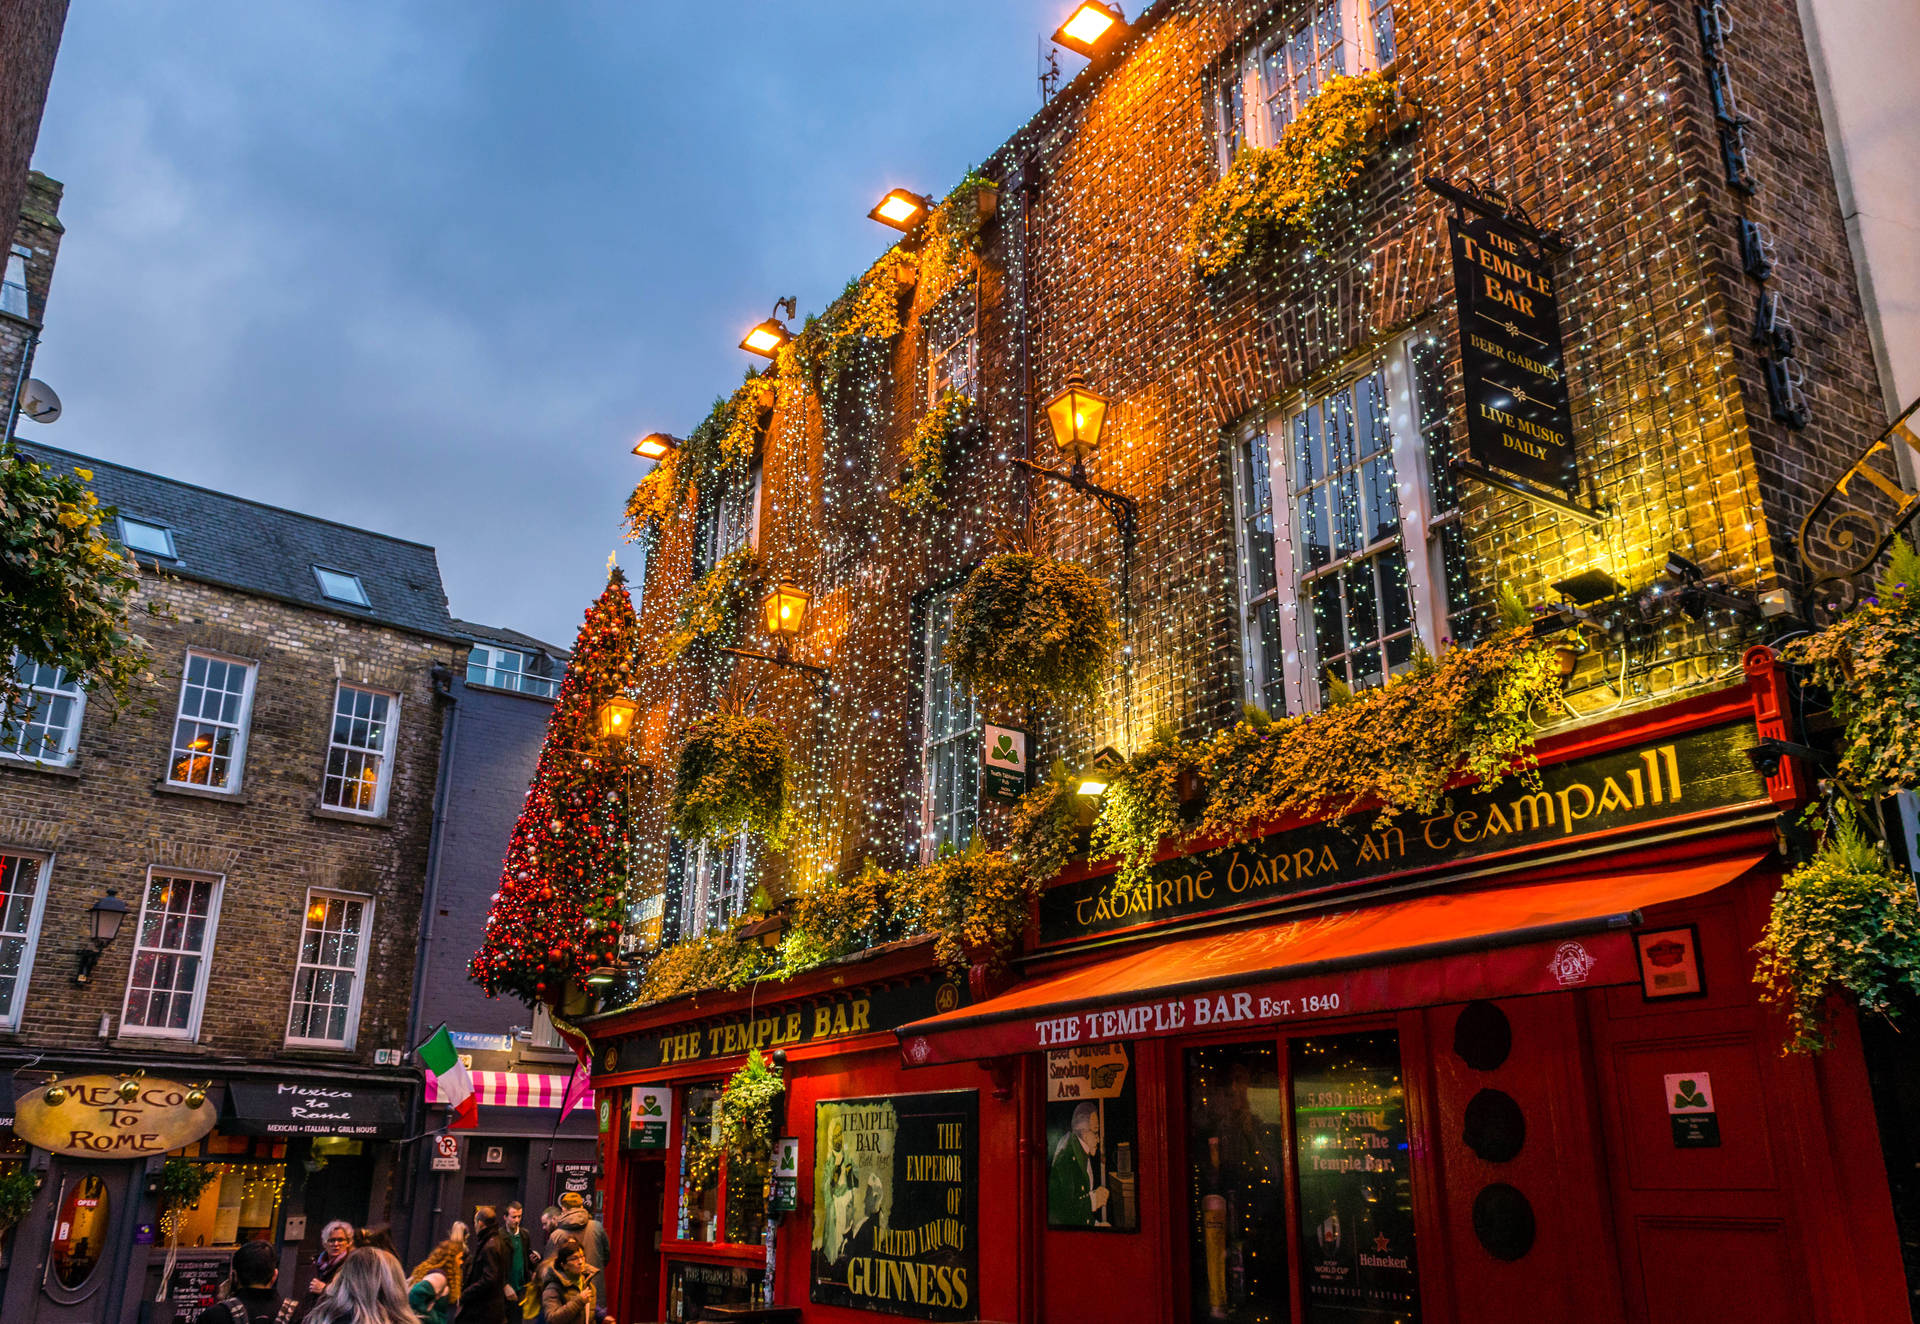 Dublintemple Bar Is A Lively And Vibrant Neighborhood In The Heart Of Dublin City. Wallpaper